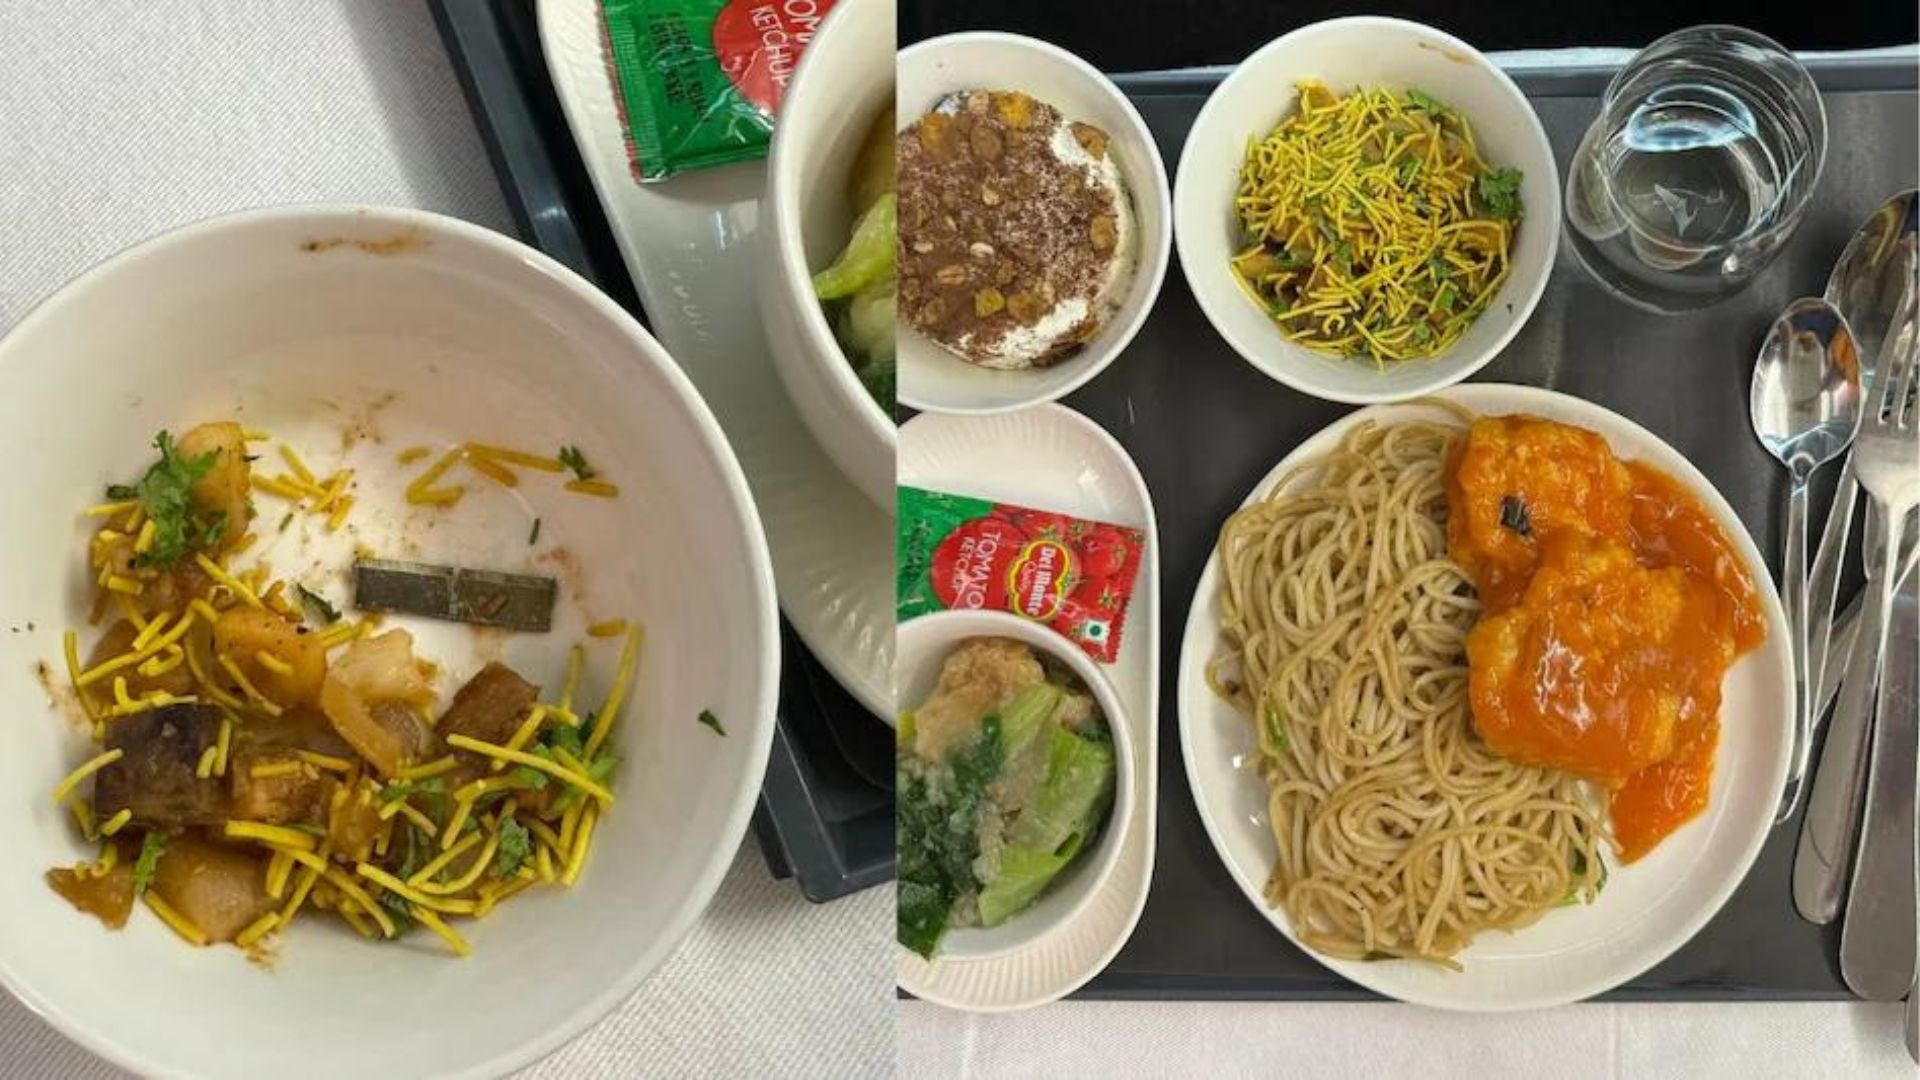 ‘Can Cut Like a Knife’: Metal Blade Found In Air India Passenger’s Meal